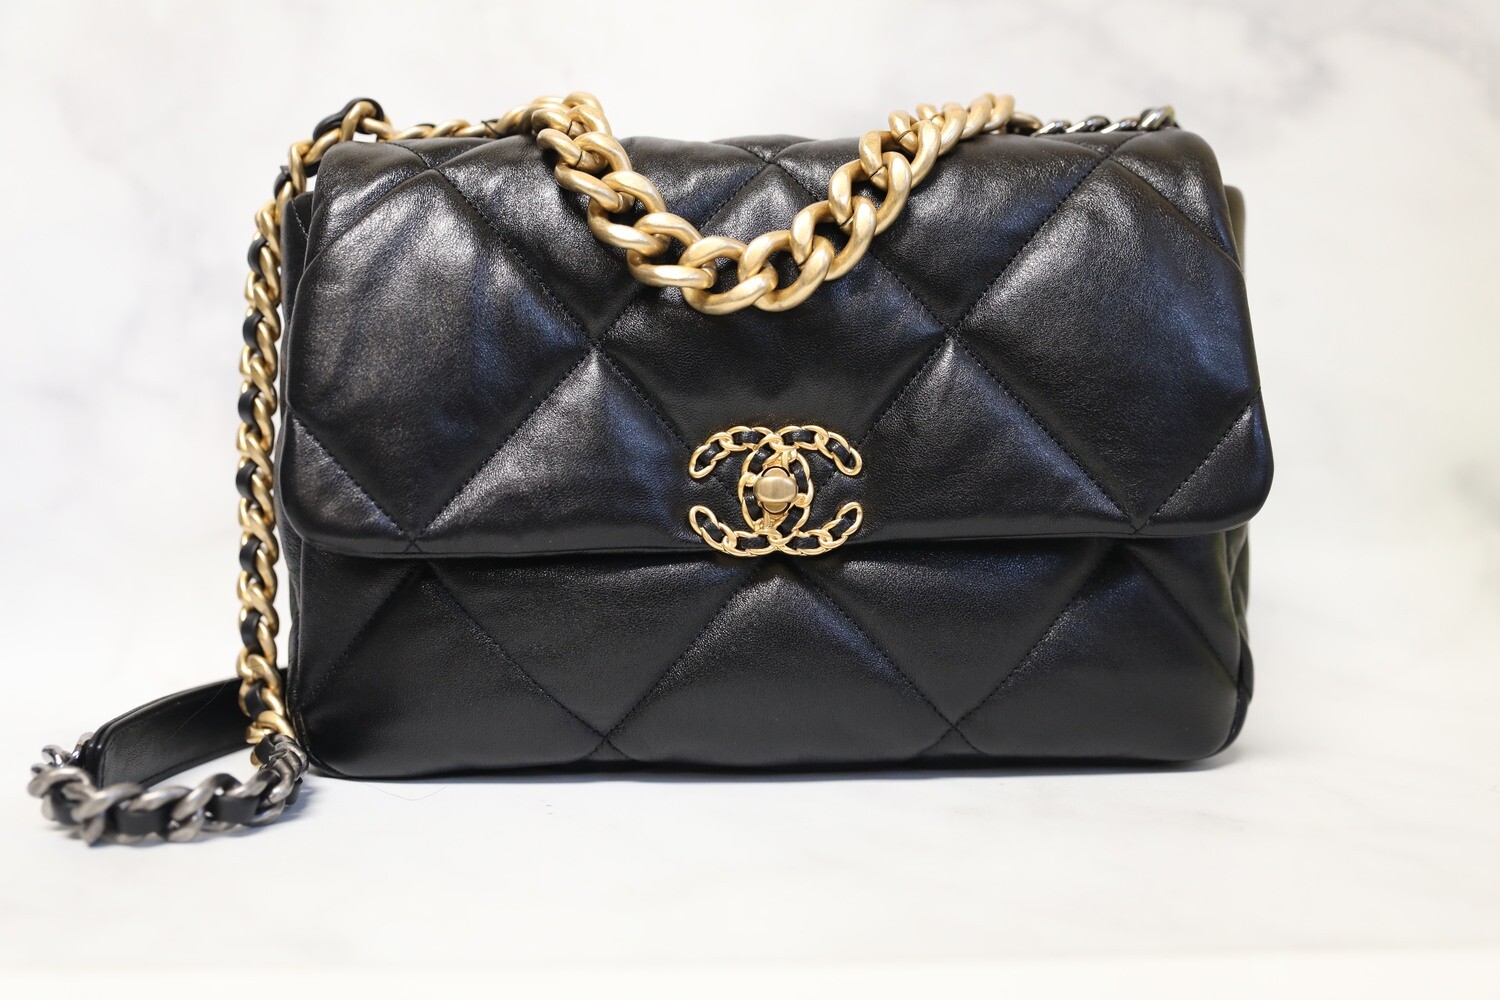 CHANEL Lambskin Quilted Medium Chanel 19 Flap Navy Blue 1237210